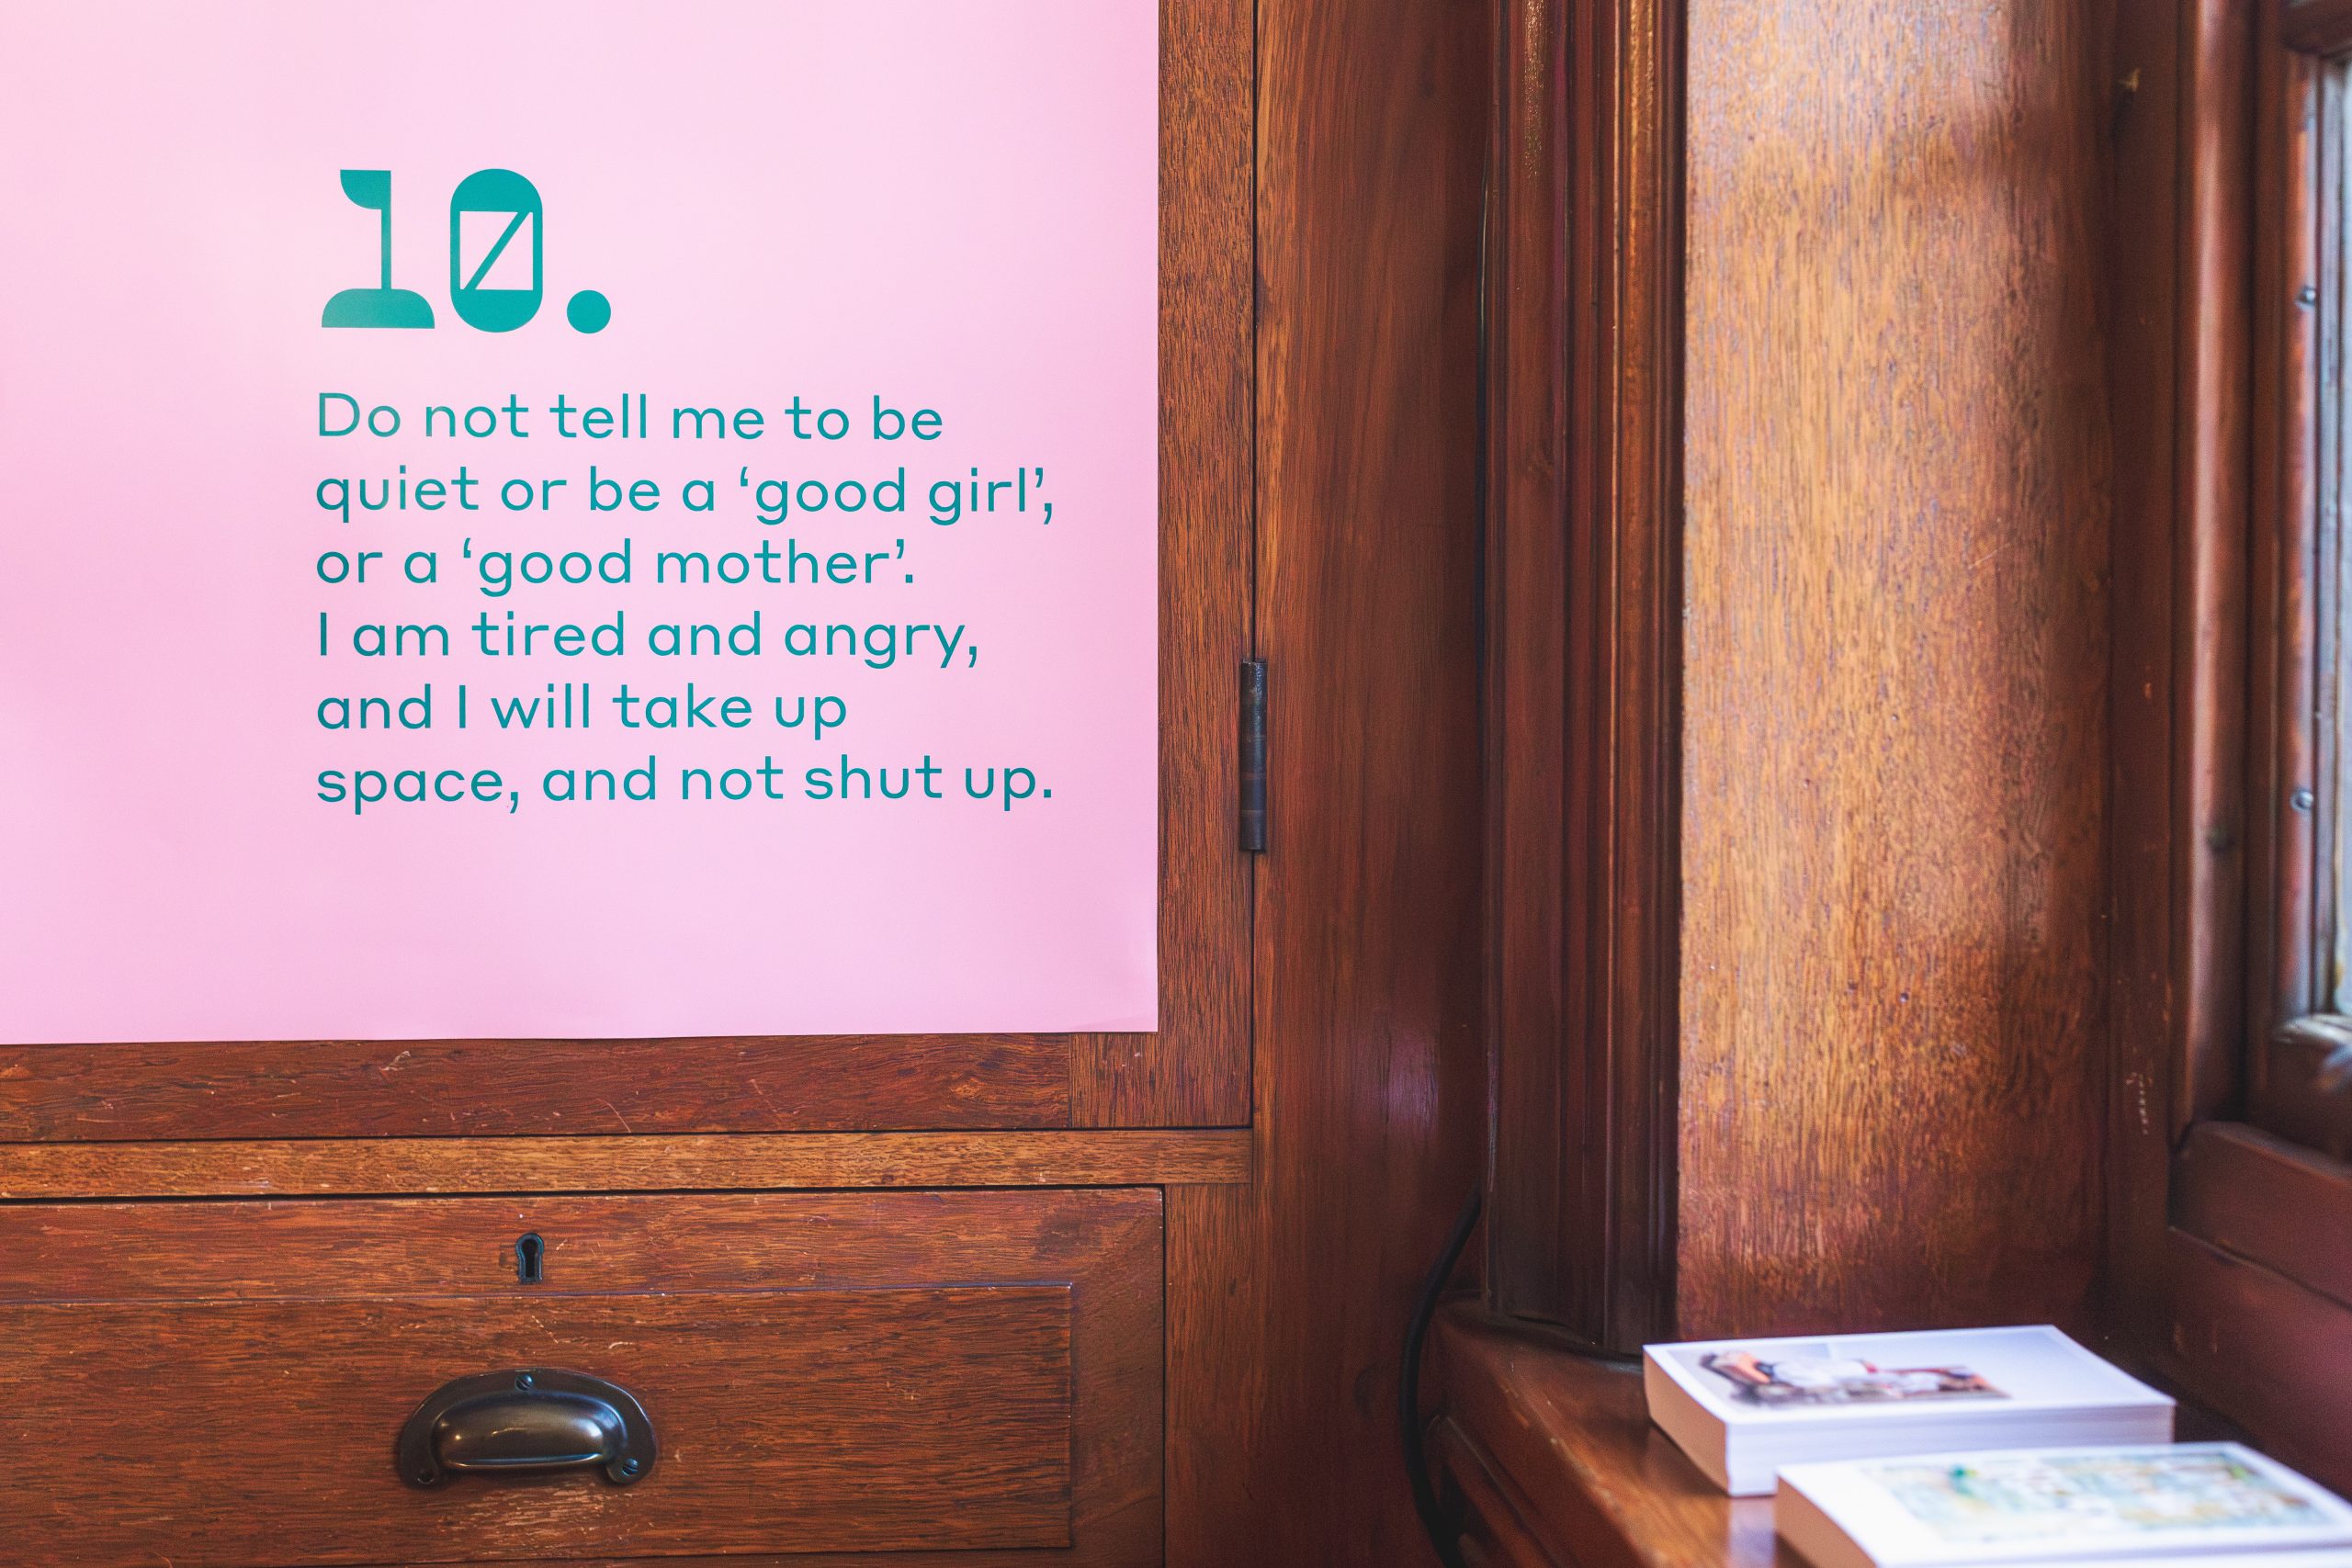 Corner of pink poster on a wooden cupboard, with the words 'Do not tell me to be quiet or be a 'good girl', or a 'good mother'. I am tired and angry, and I will take up space, and not shut up.